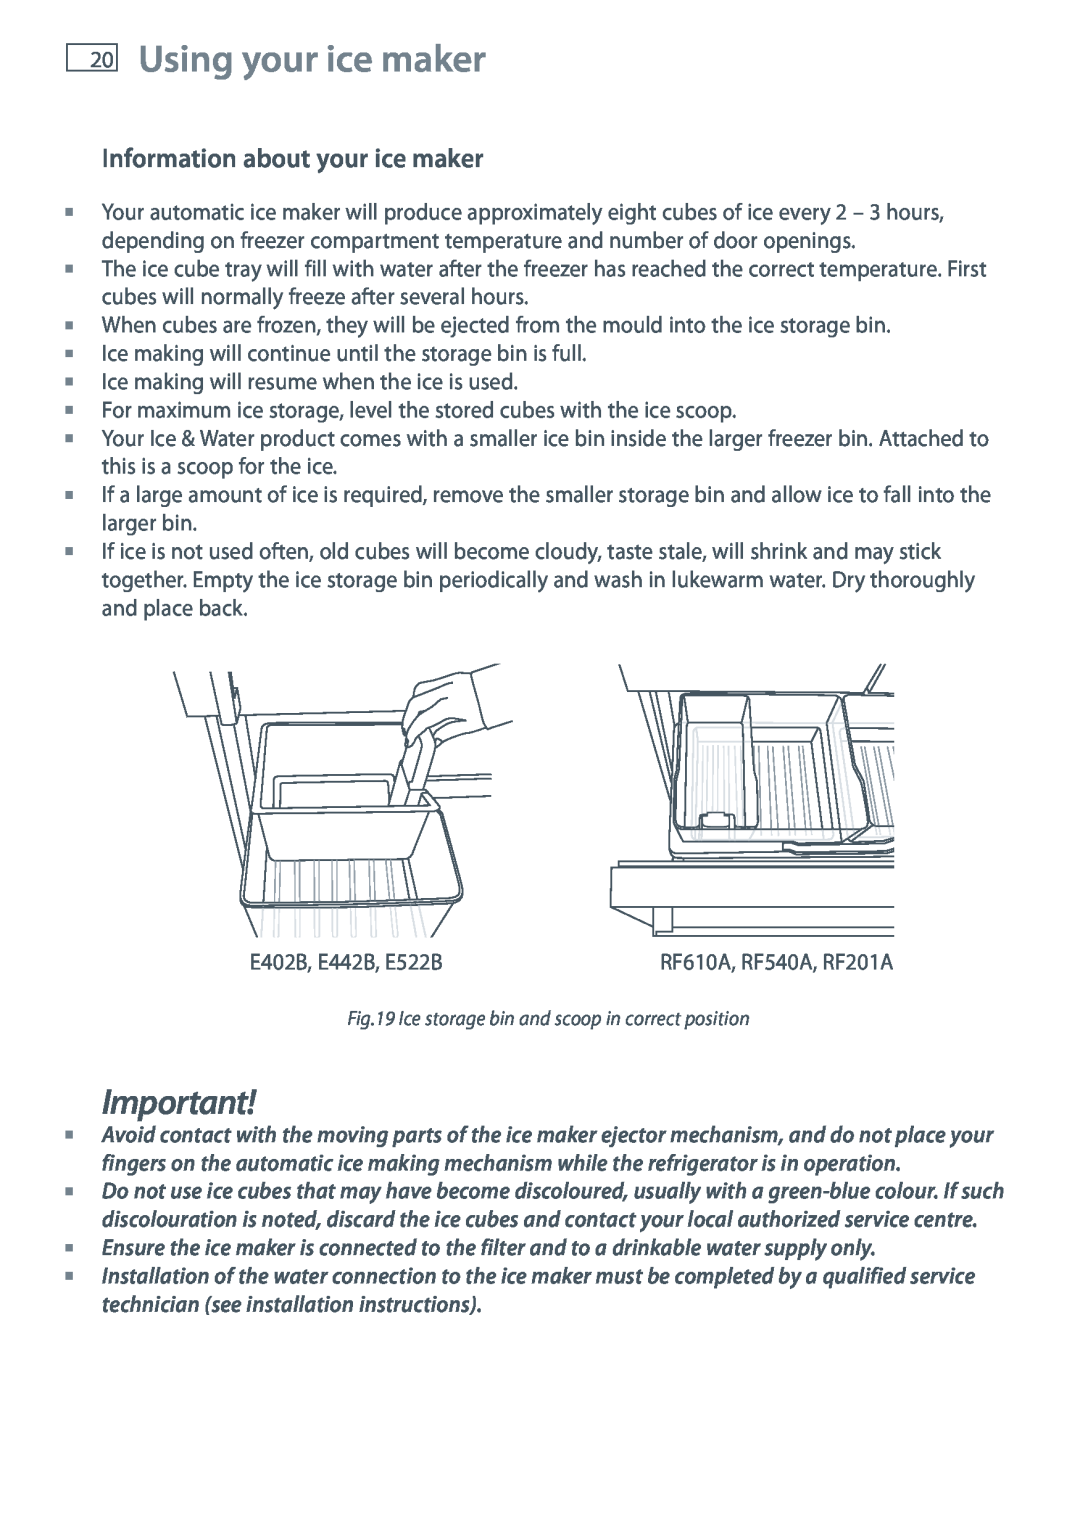 Fisher & Paykel RF201A, RF610A, RF540A installation instructions Information about your ice maker, Using your ice maker 